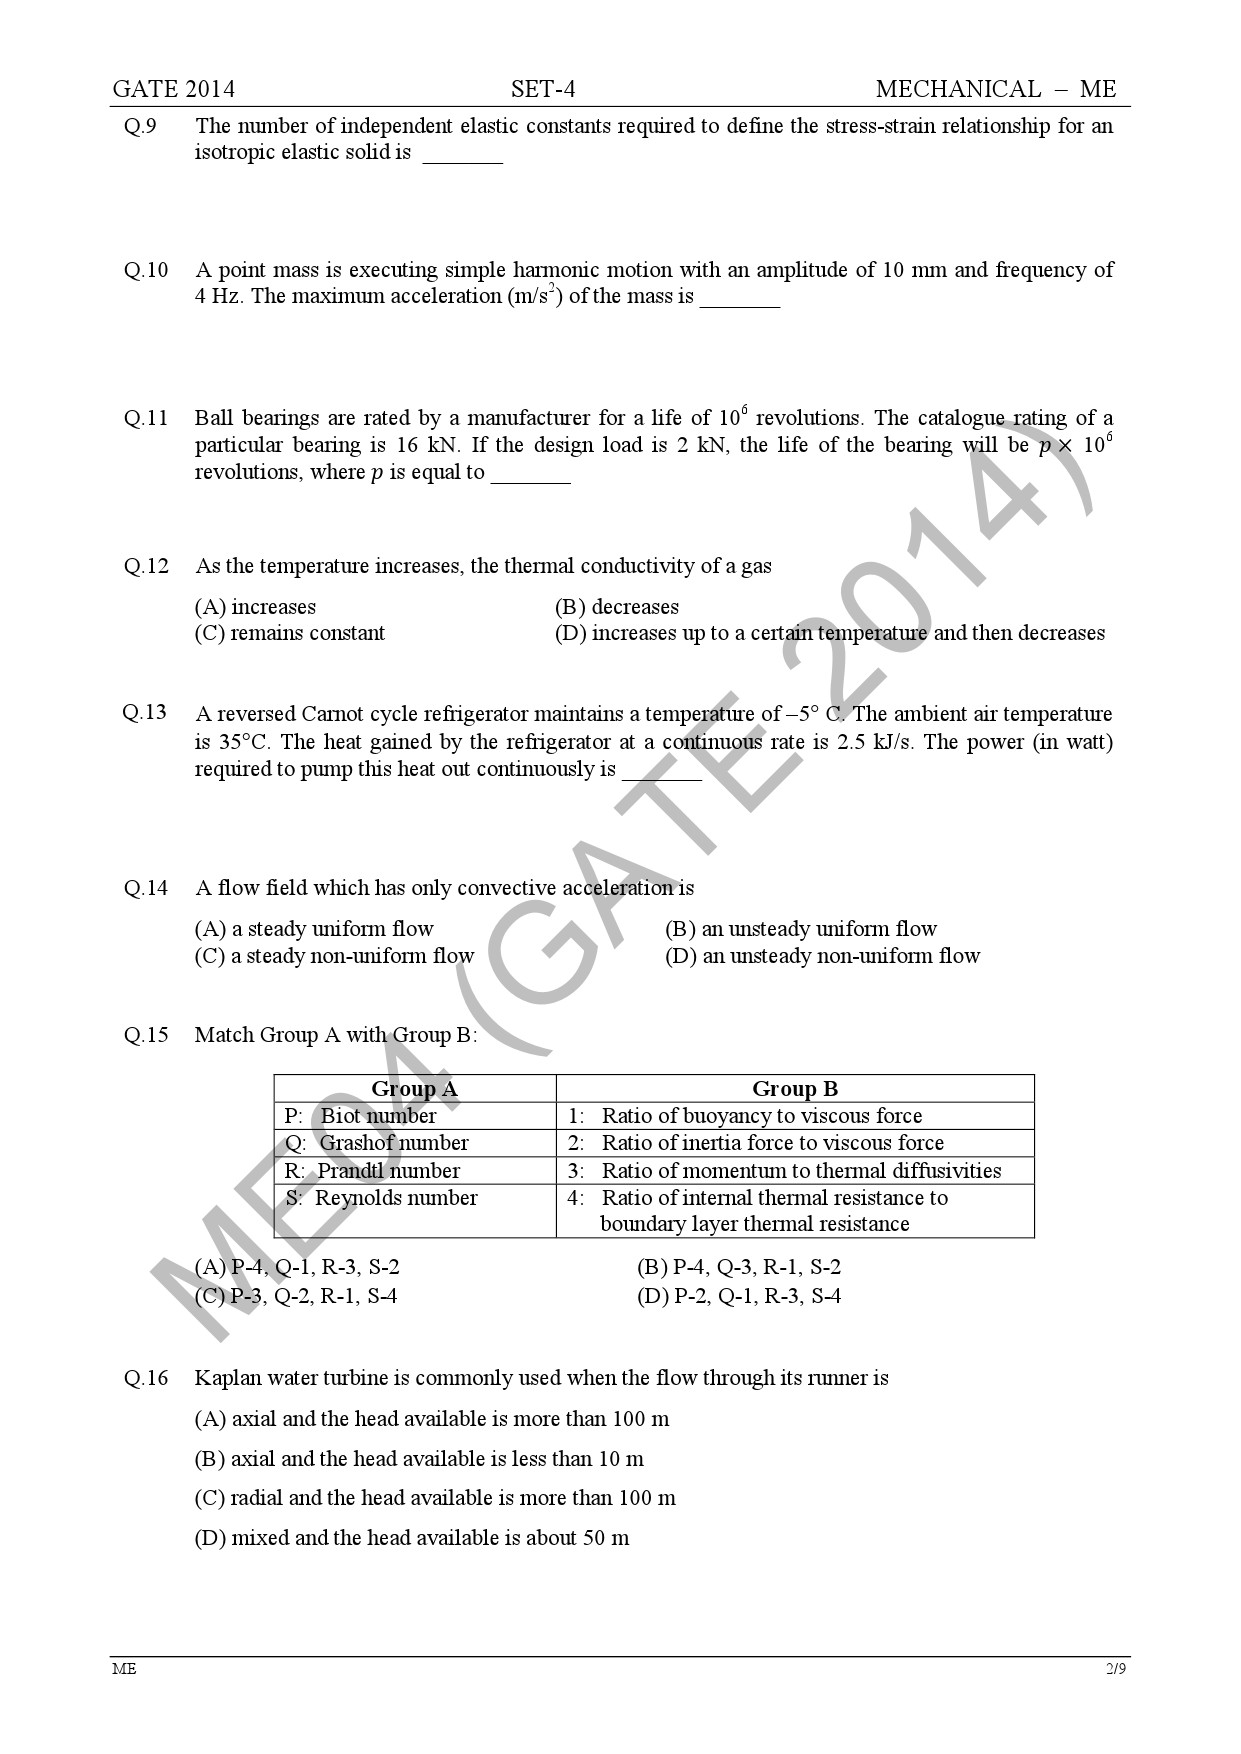 GATE Exam Question Paper 2014 Mechanical Engineering Set 4 8